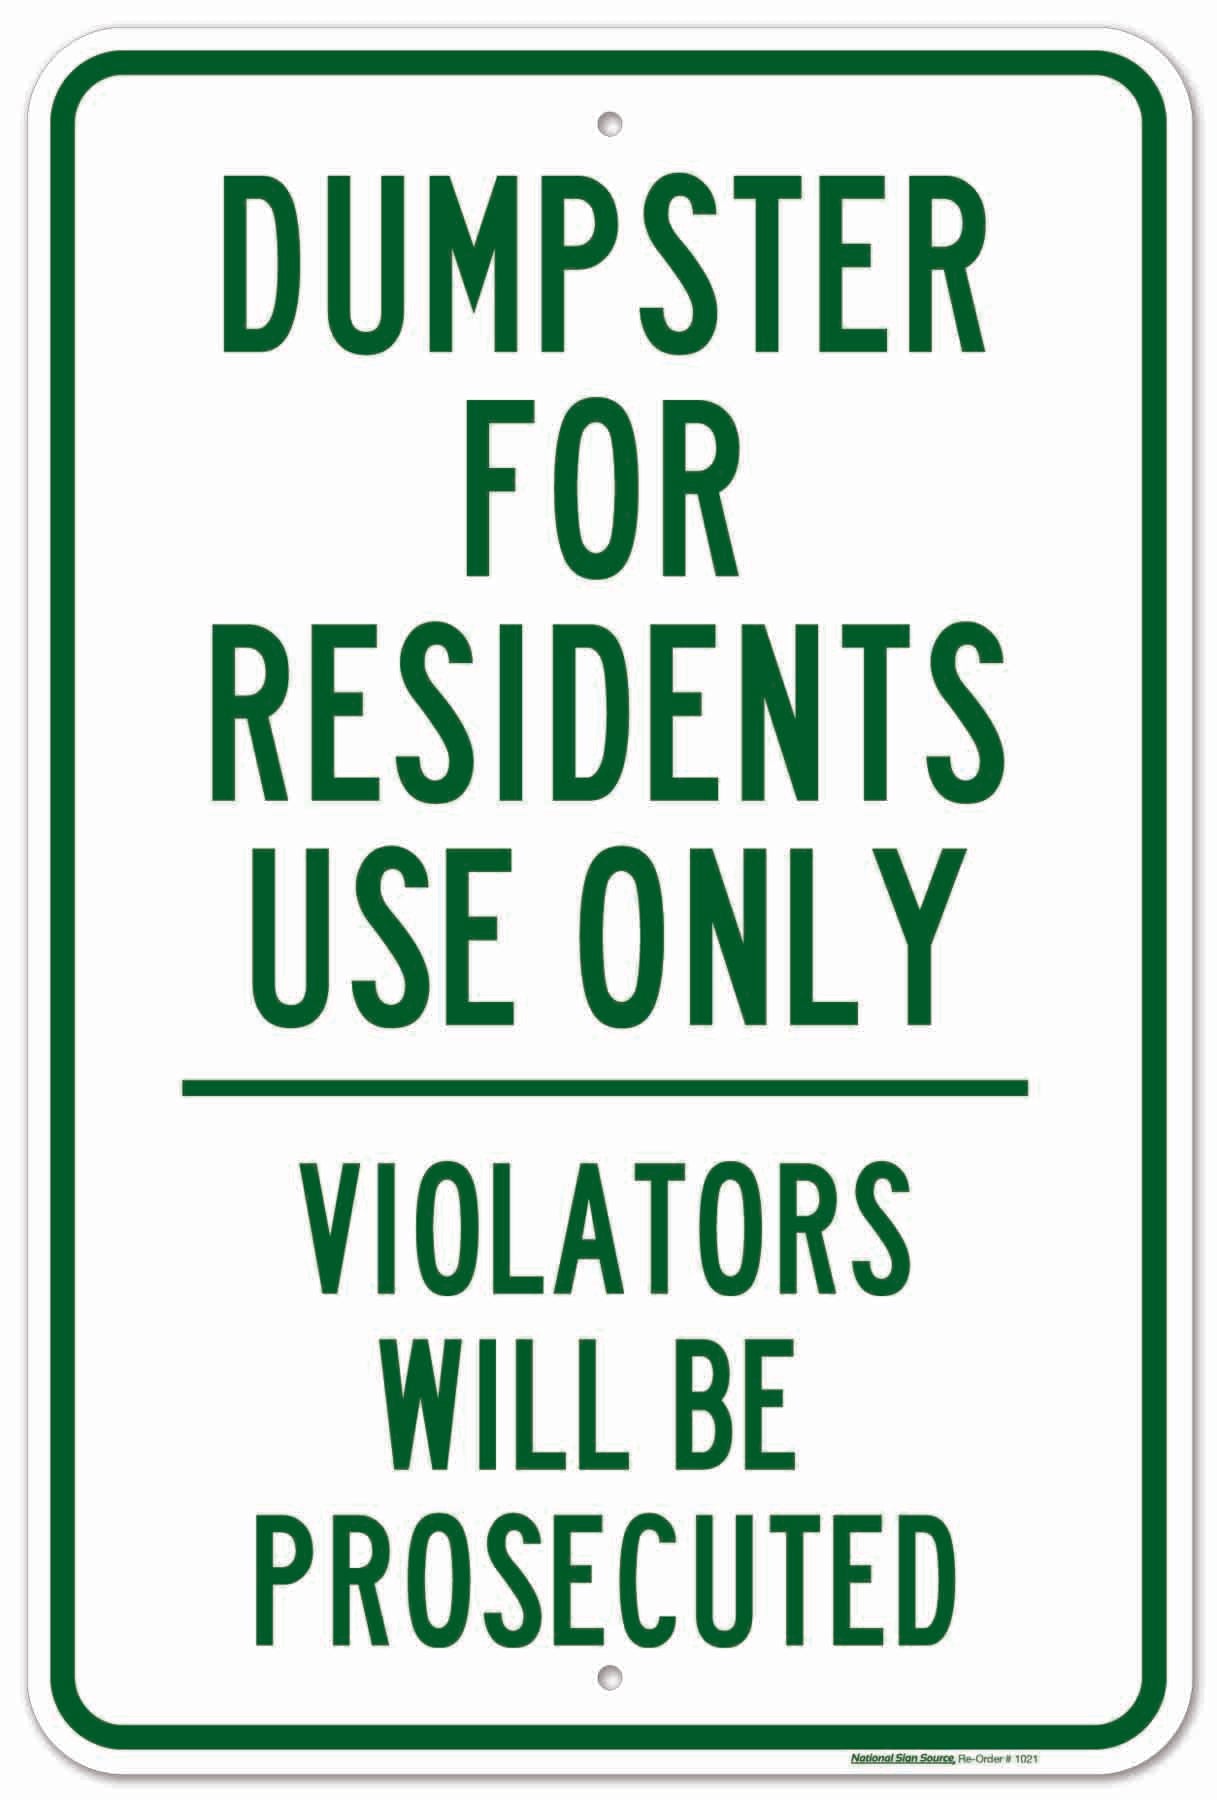 Dumpster sign, for residents use only.  Violators will be prosecuted.  Aluminum sign with reflective options.